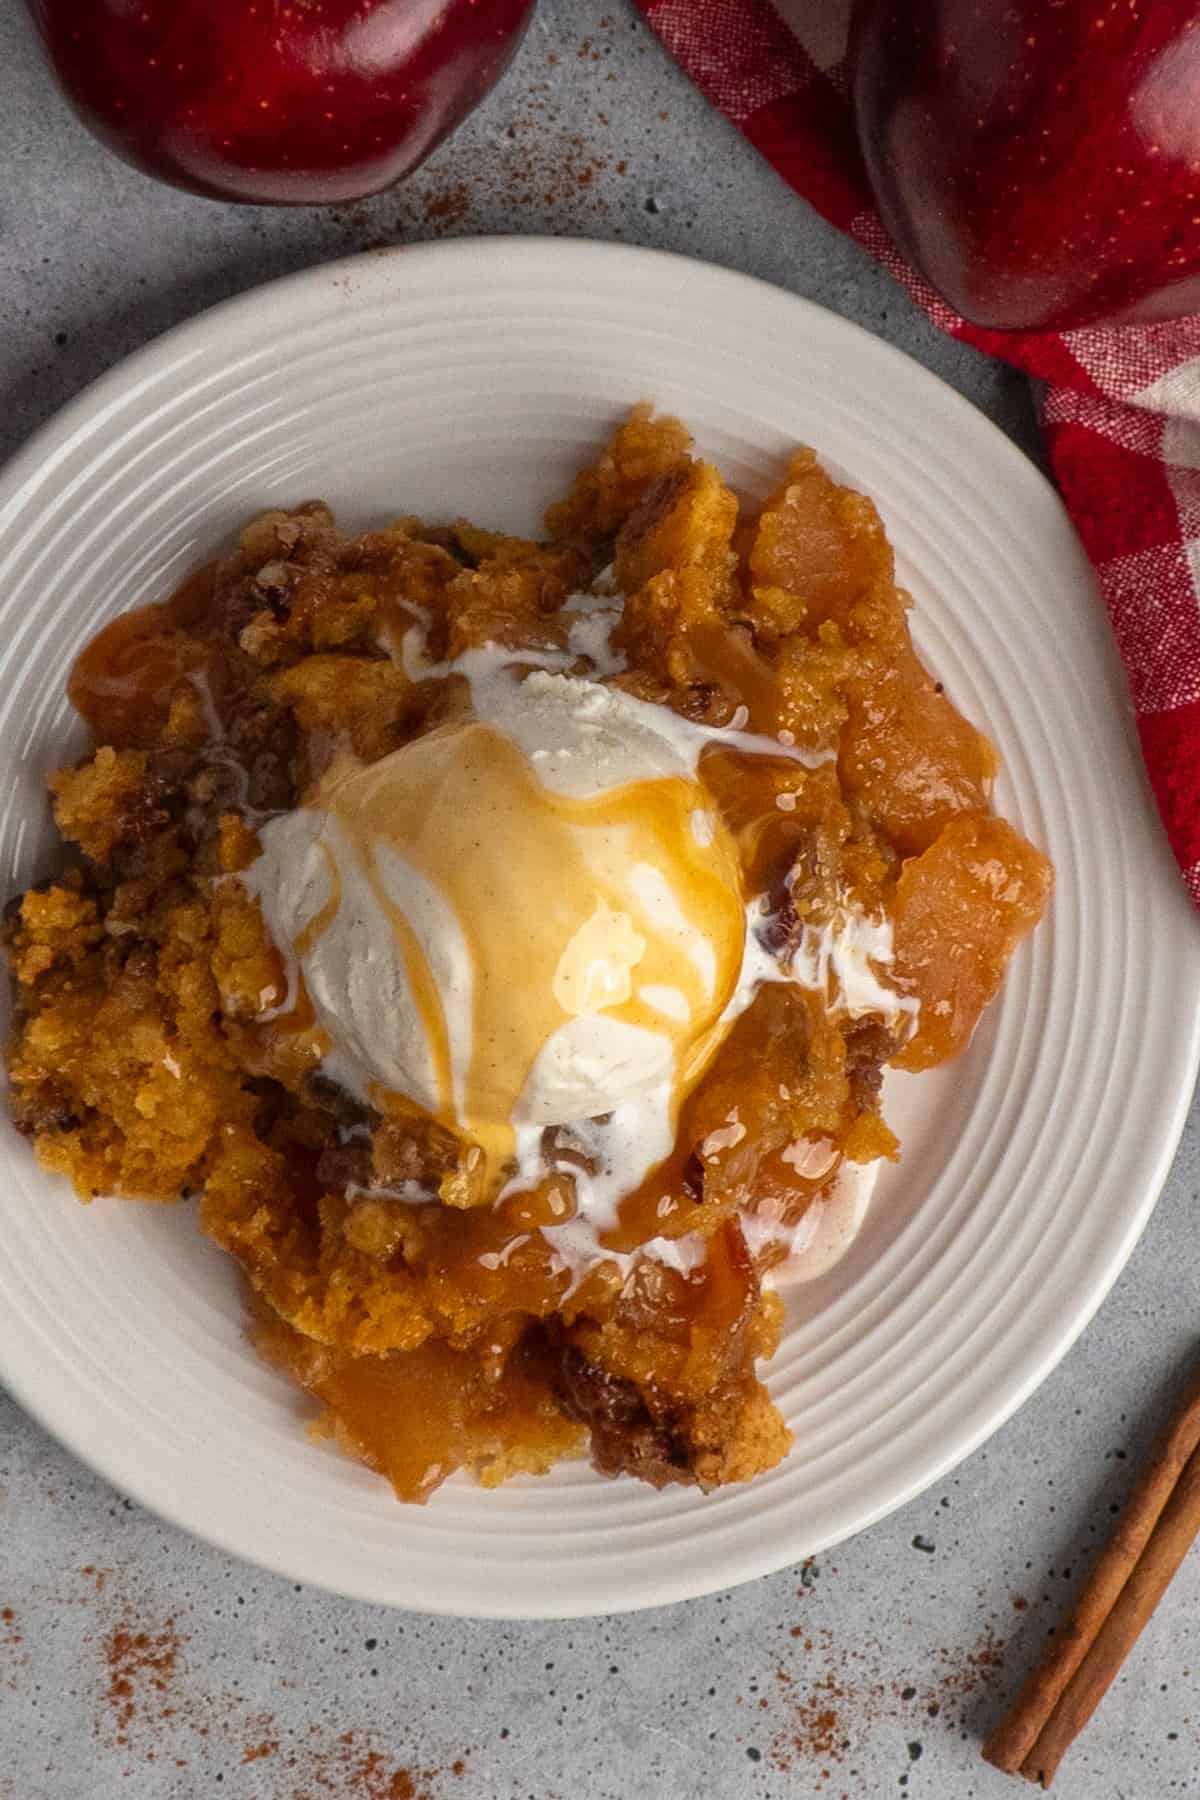 Overhead, look at apple cobbler on a plate with ice cream and caramel sauce.